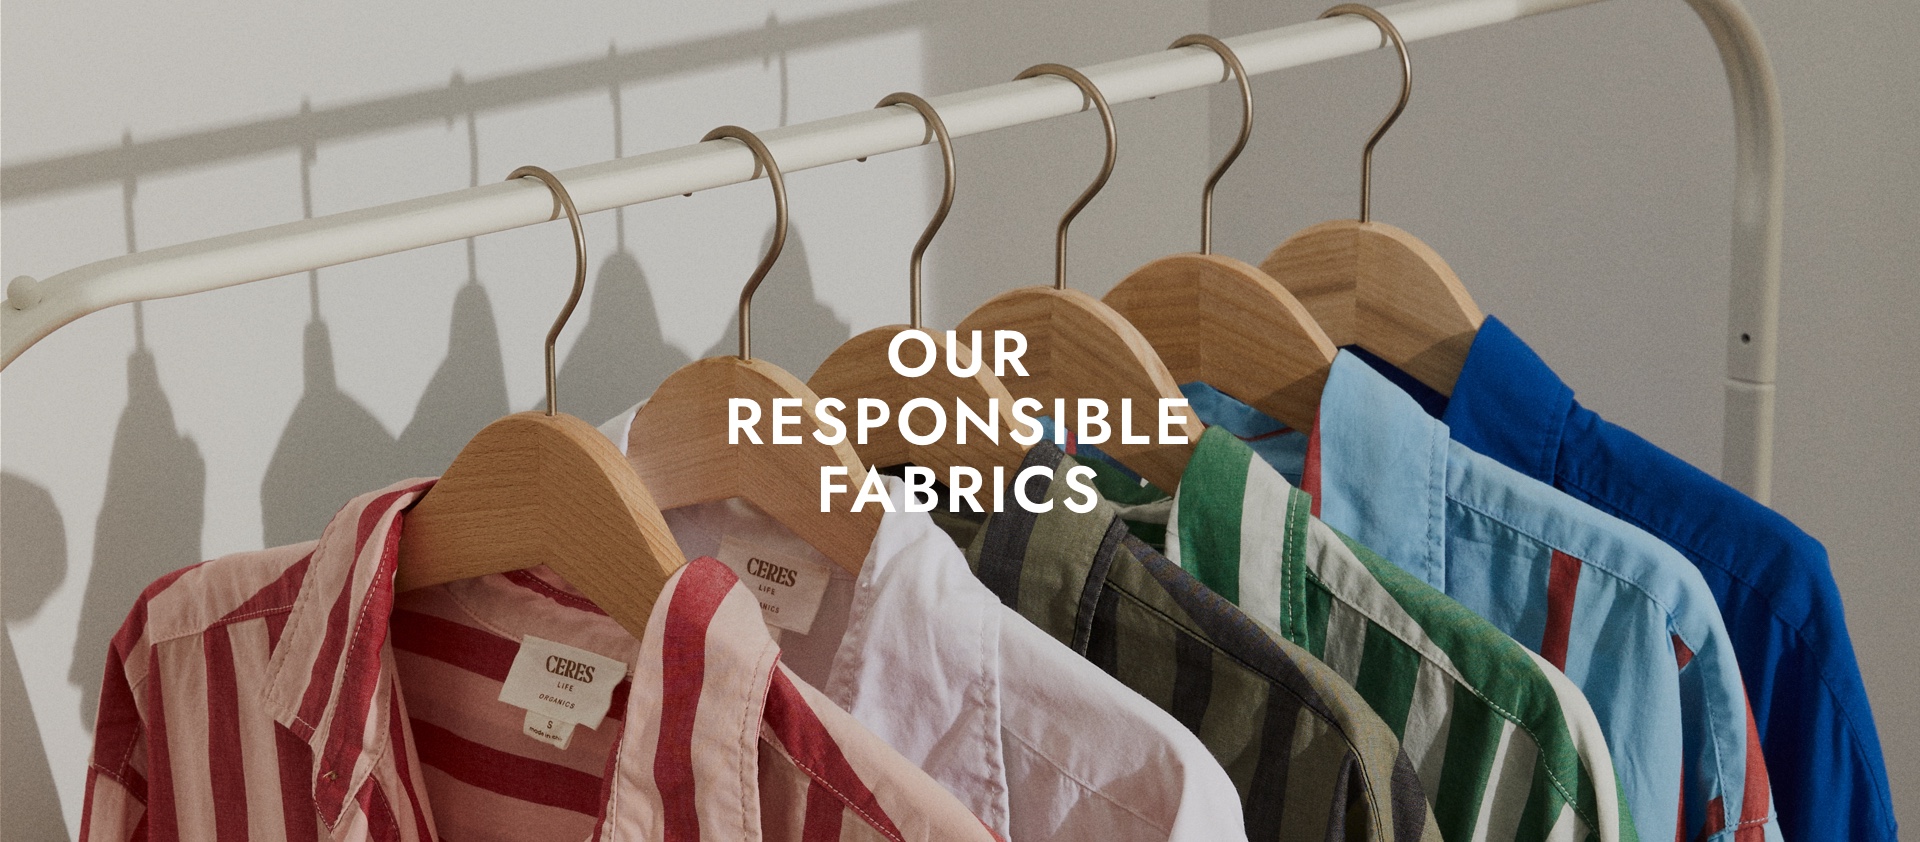 Our responsible fabrics